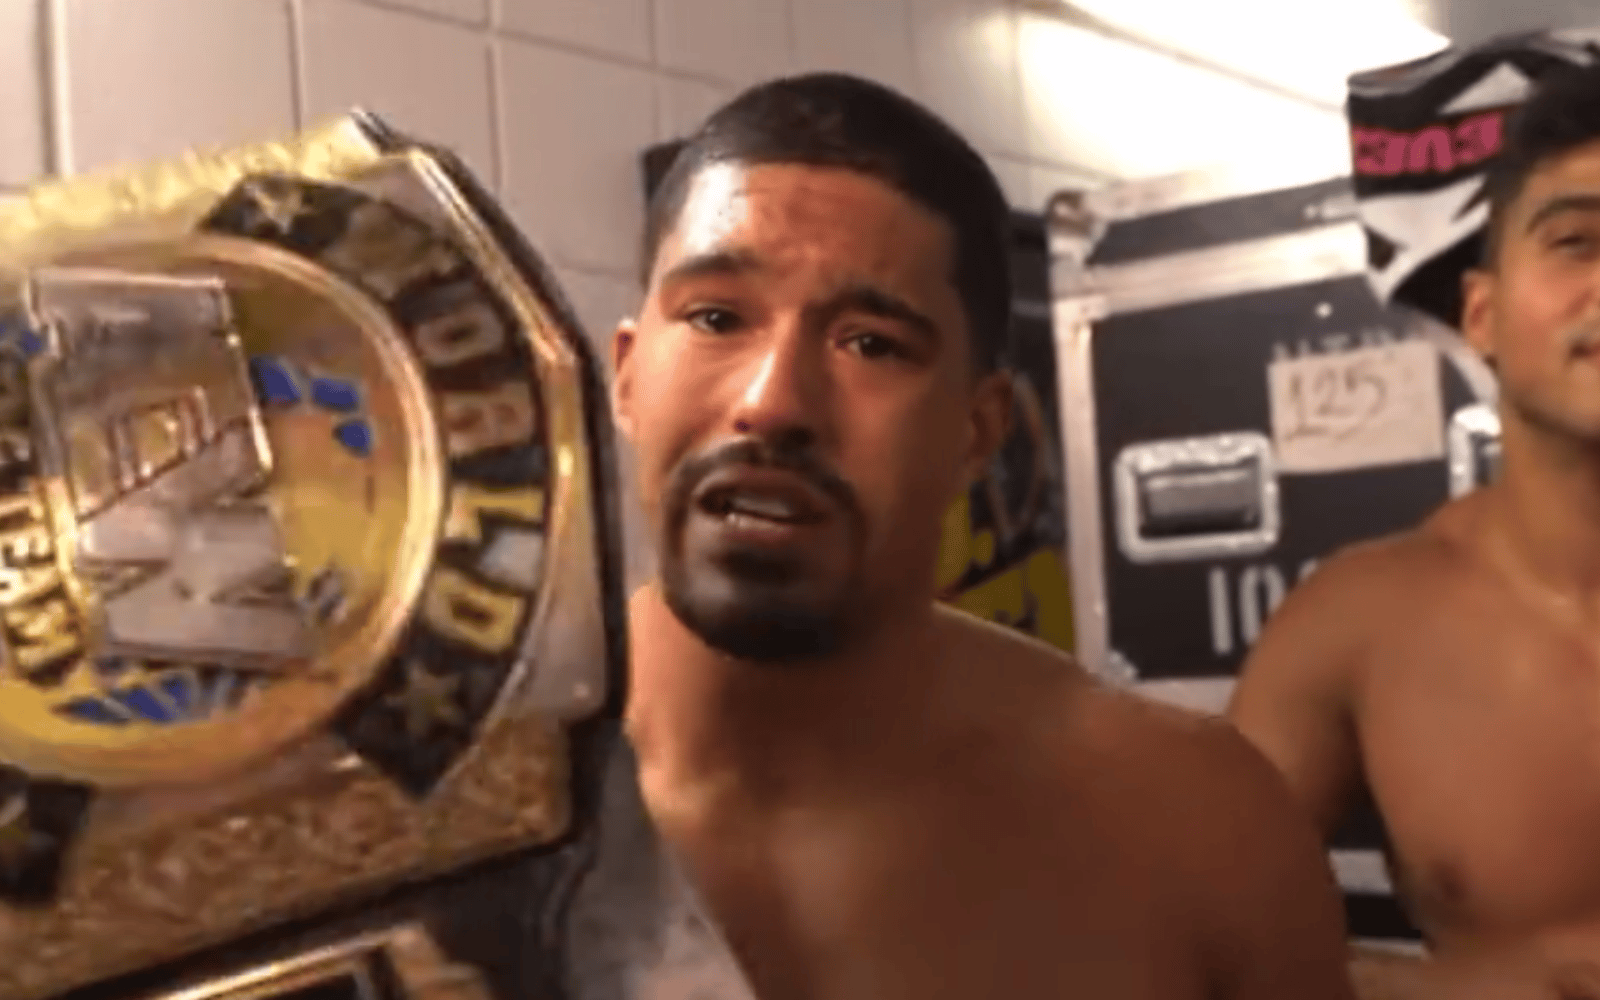 Gay pro-wrestler Anthony Bowens shares emotional message after historic AEW title win